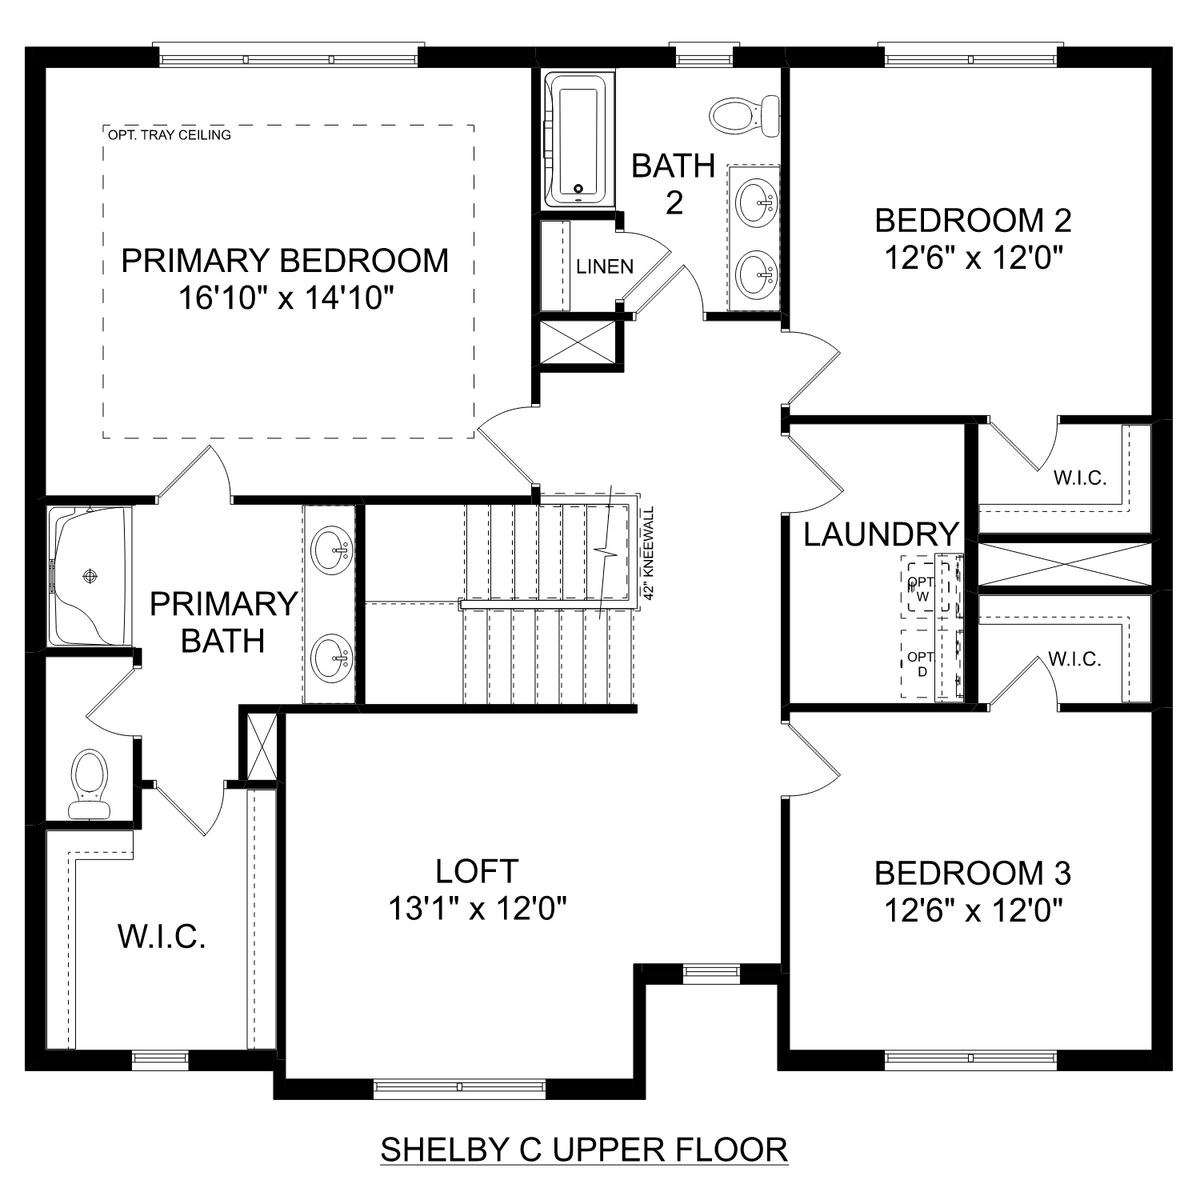 2 - The Shelby C floor plan layout for 304 Yarbrough Road in Davidson Homes' Little Burwell Estates community.